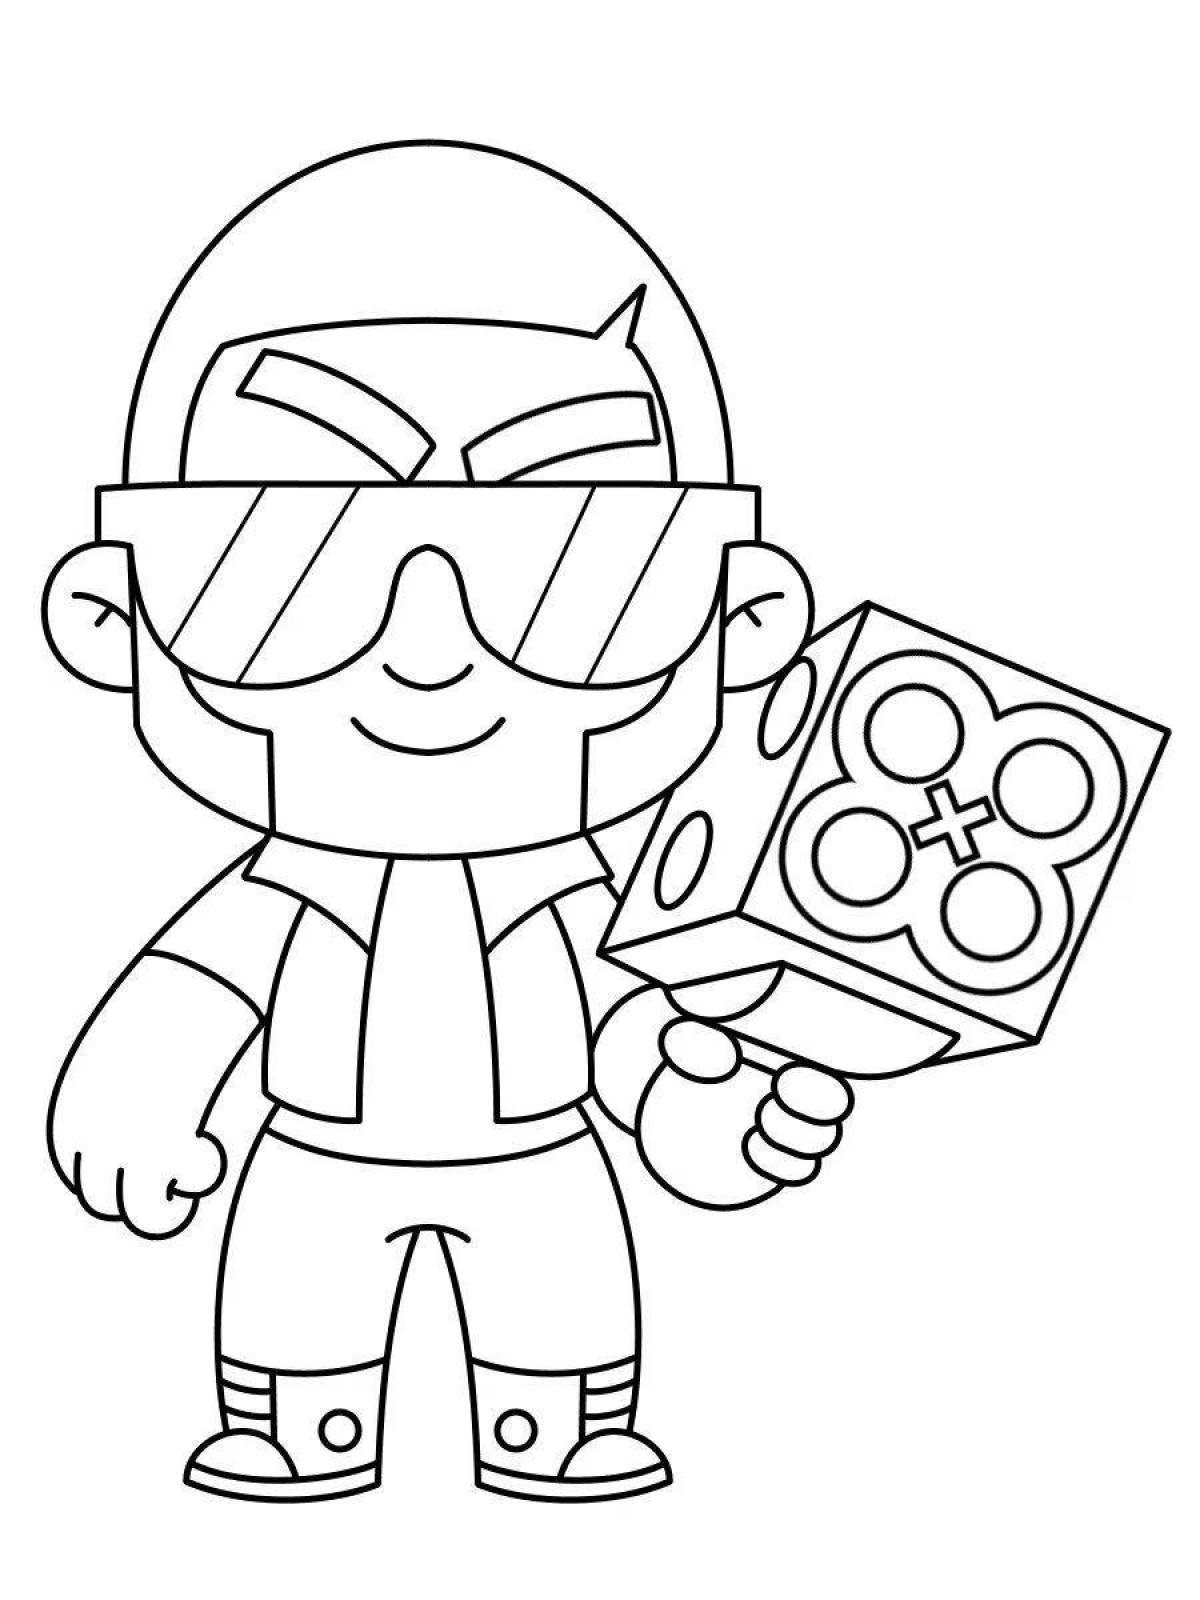 Fabulous brown stars coloring pages for boys